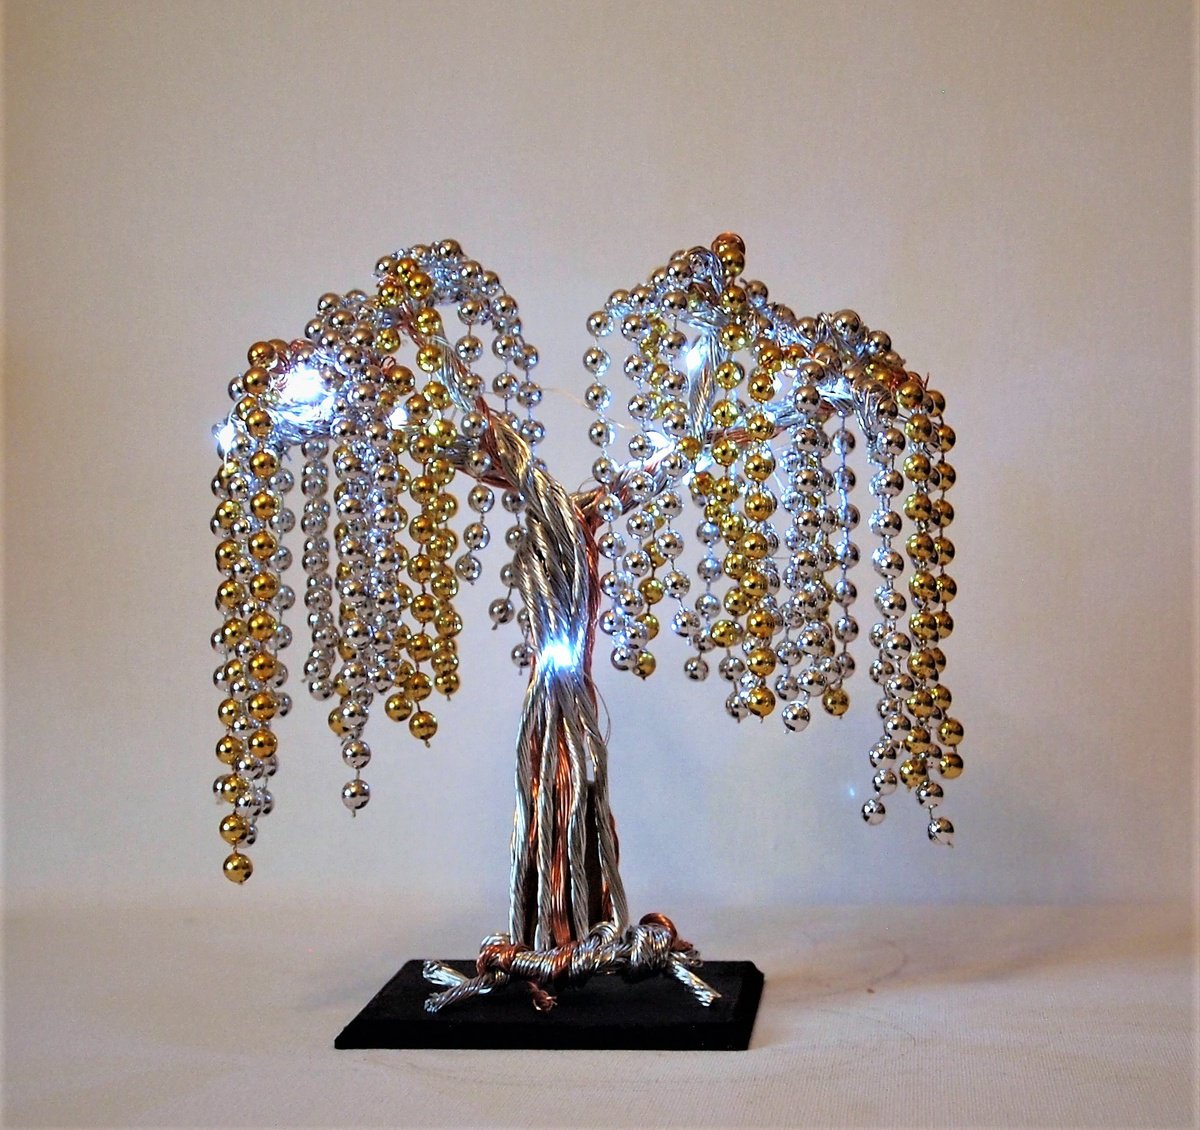 Silver and Copper Weeping willow Tree by Steph Morgan